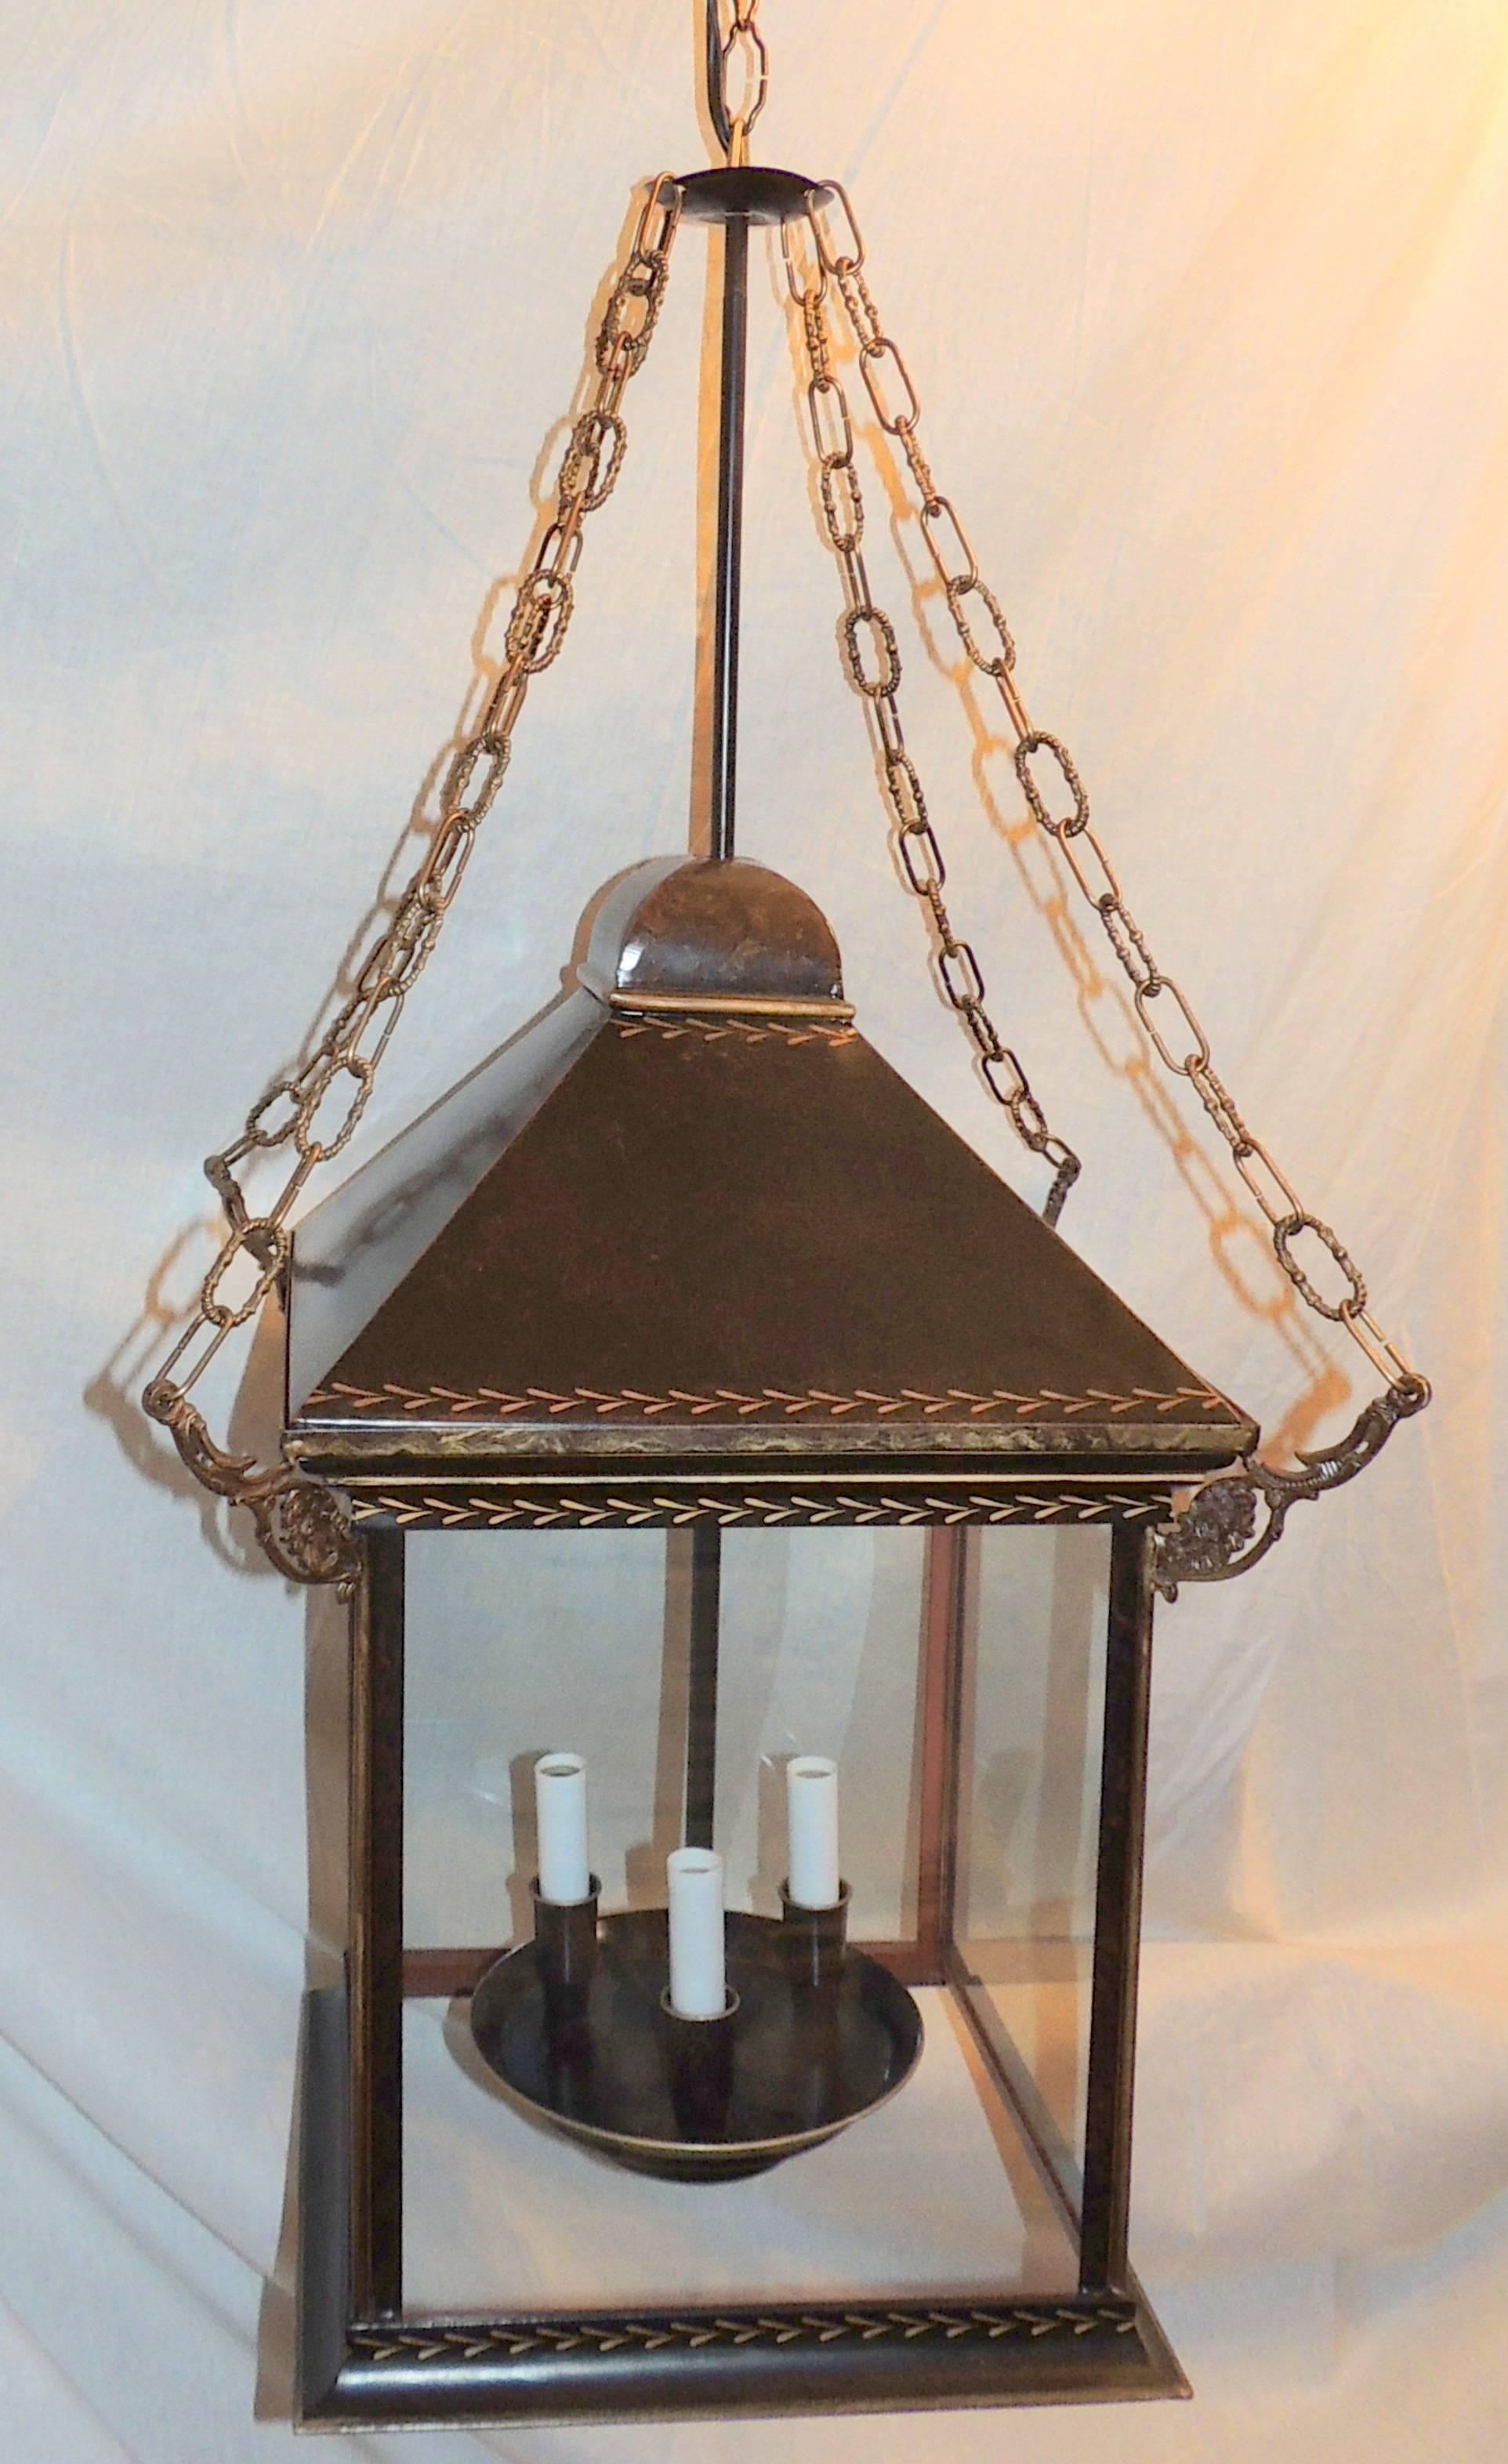 Tole Brown Distressed Leather Gilt Three-Light Glass Lantern Pendent Fixture 2